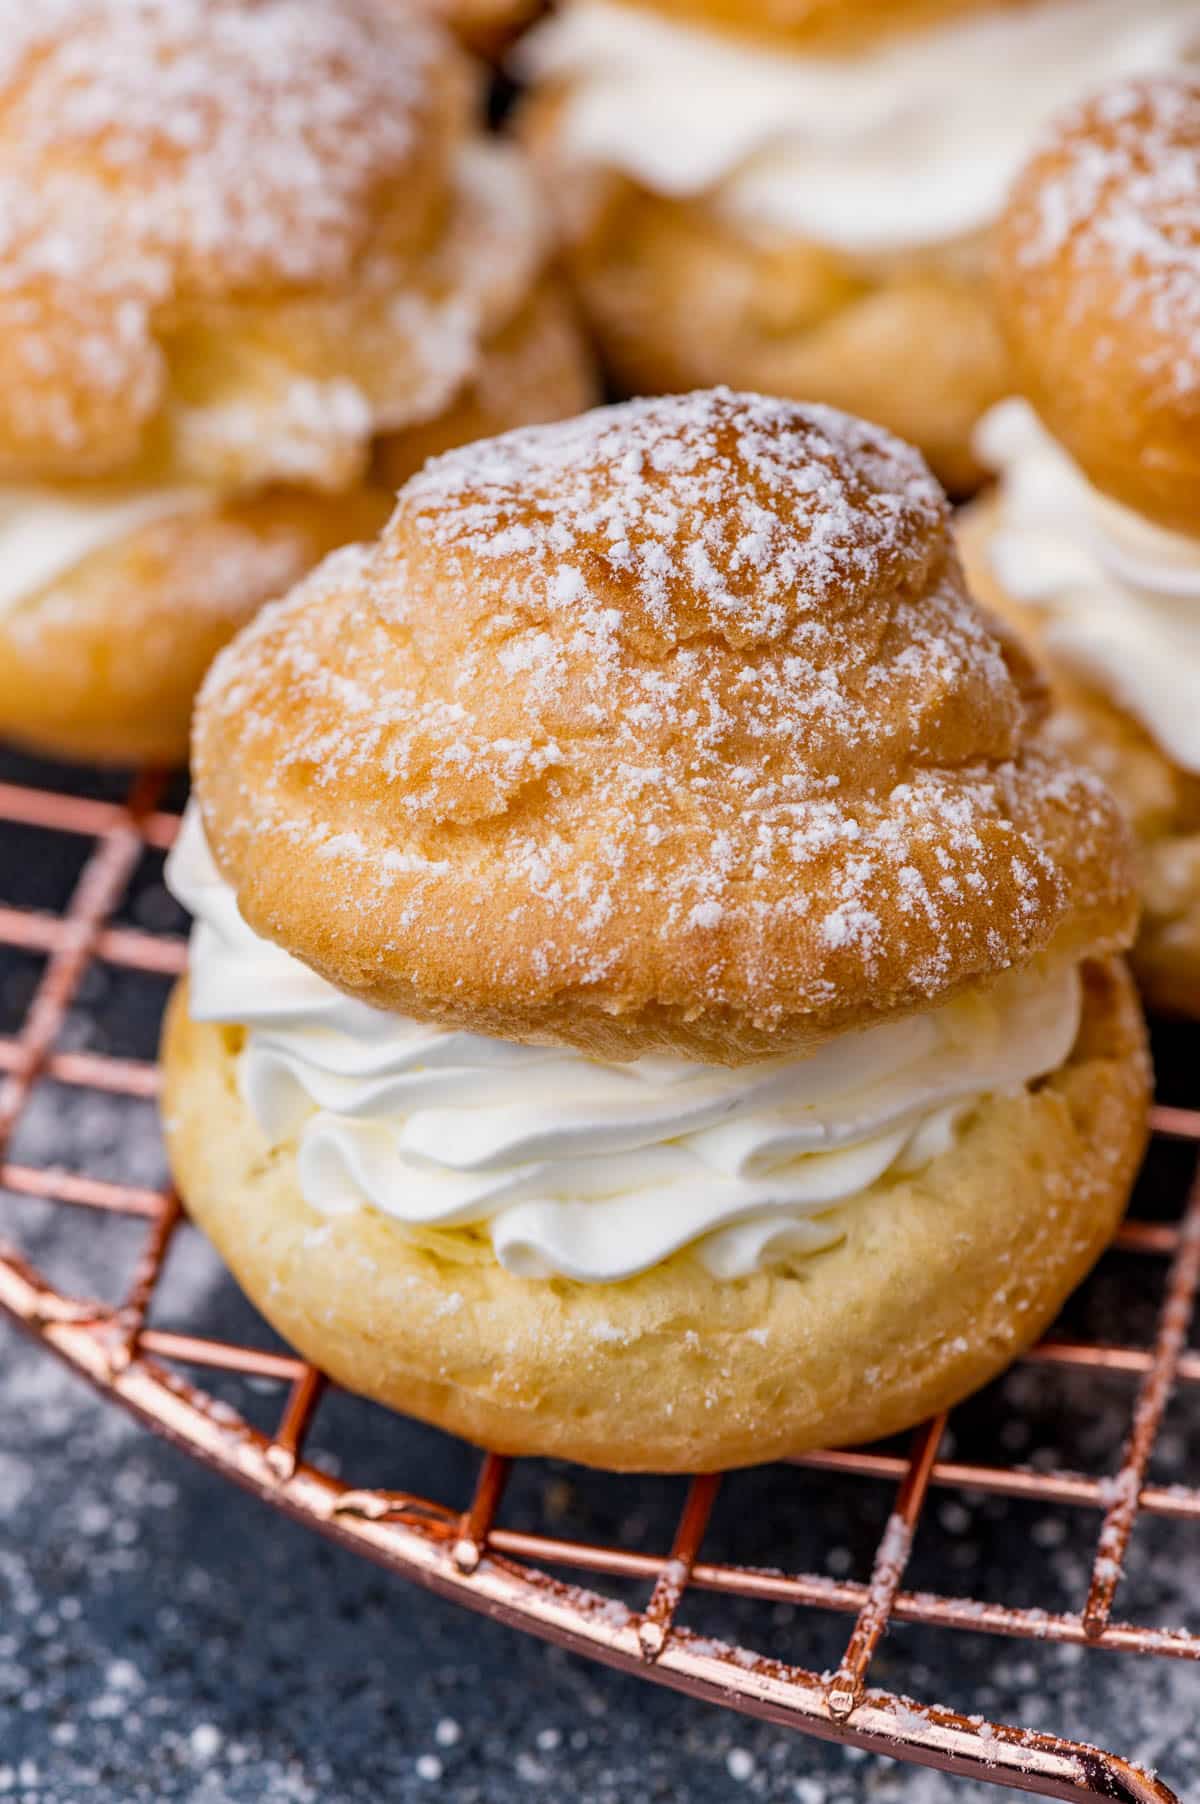 a cream puff filled with whipped cream on a wire rack